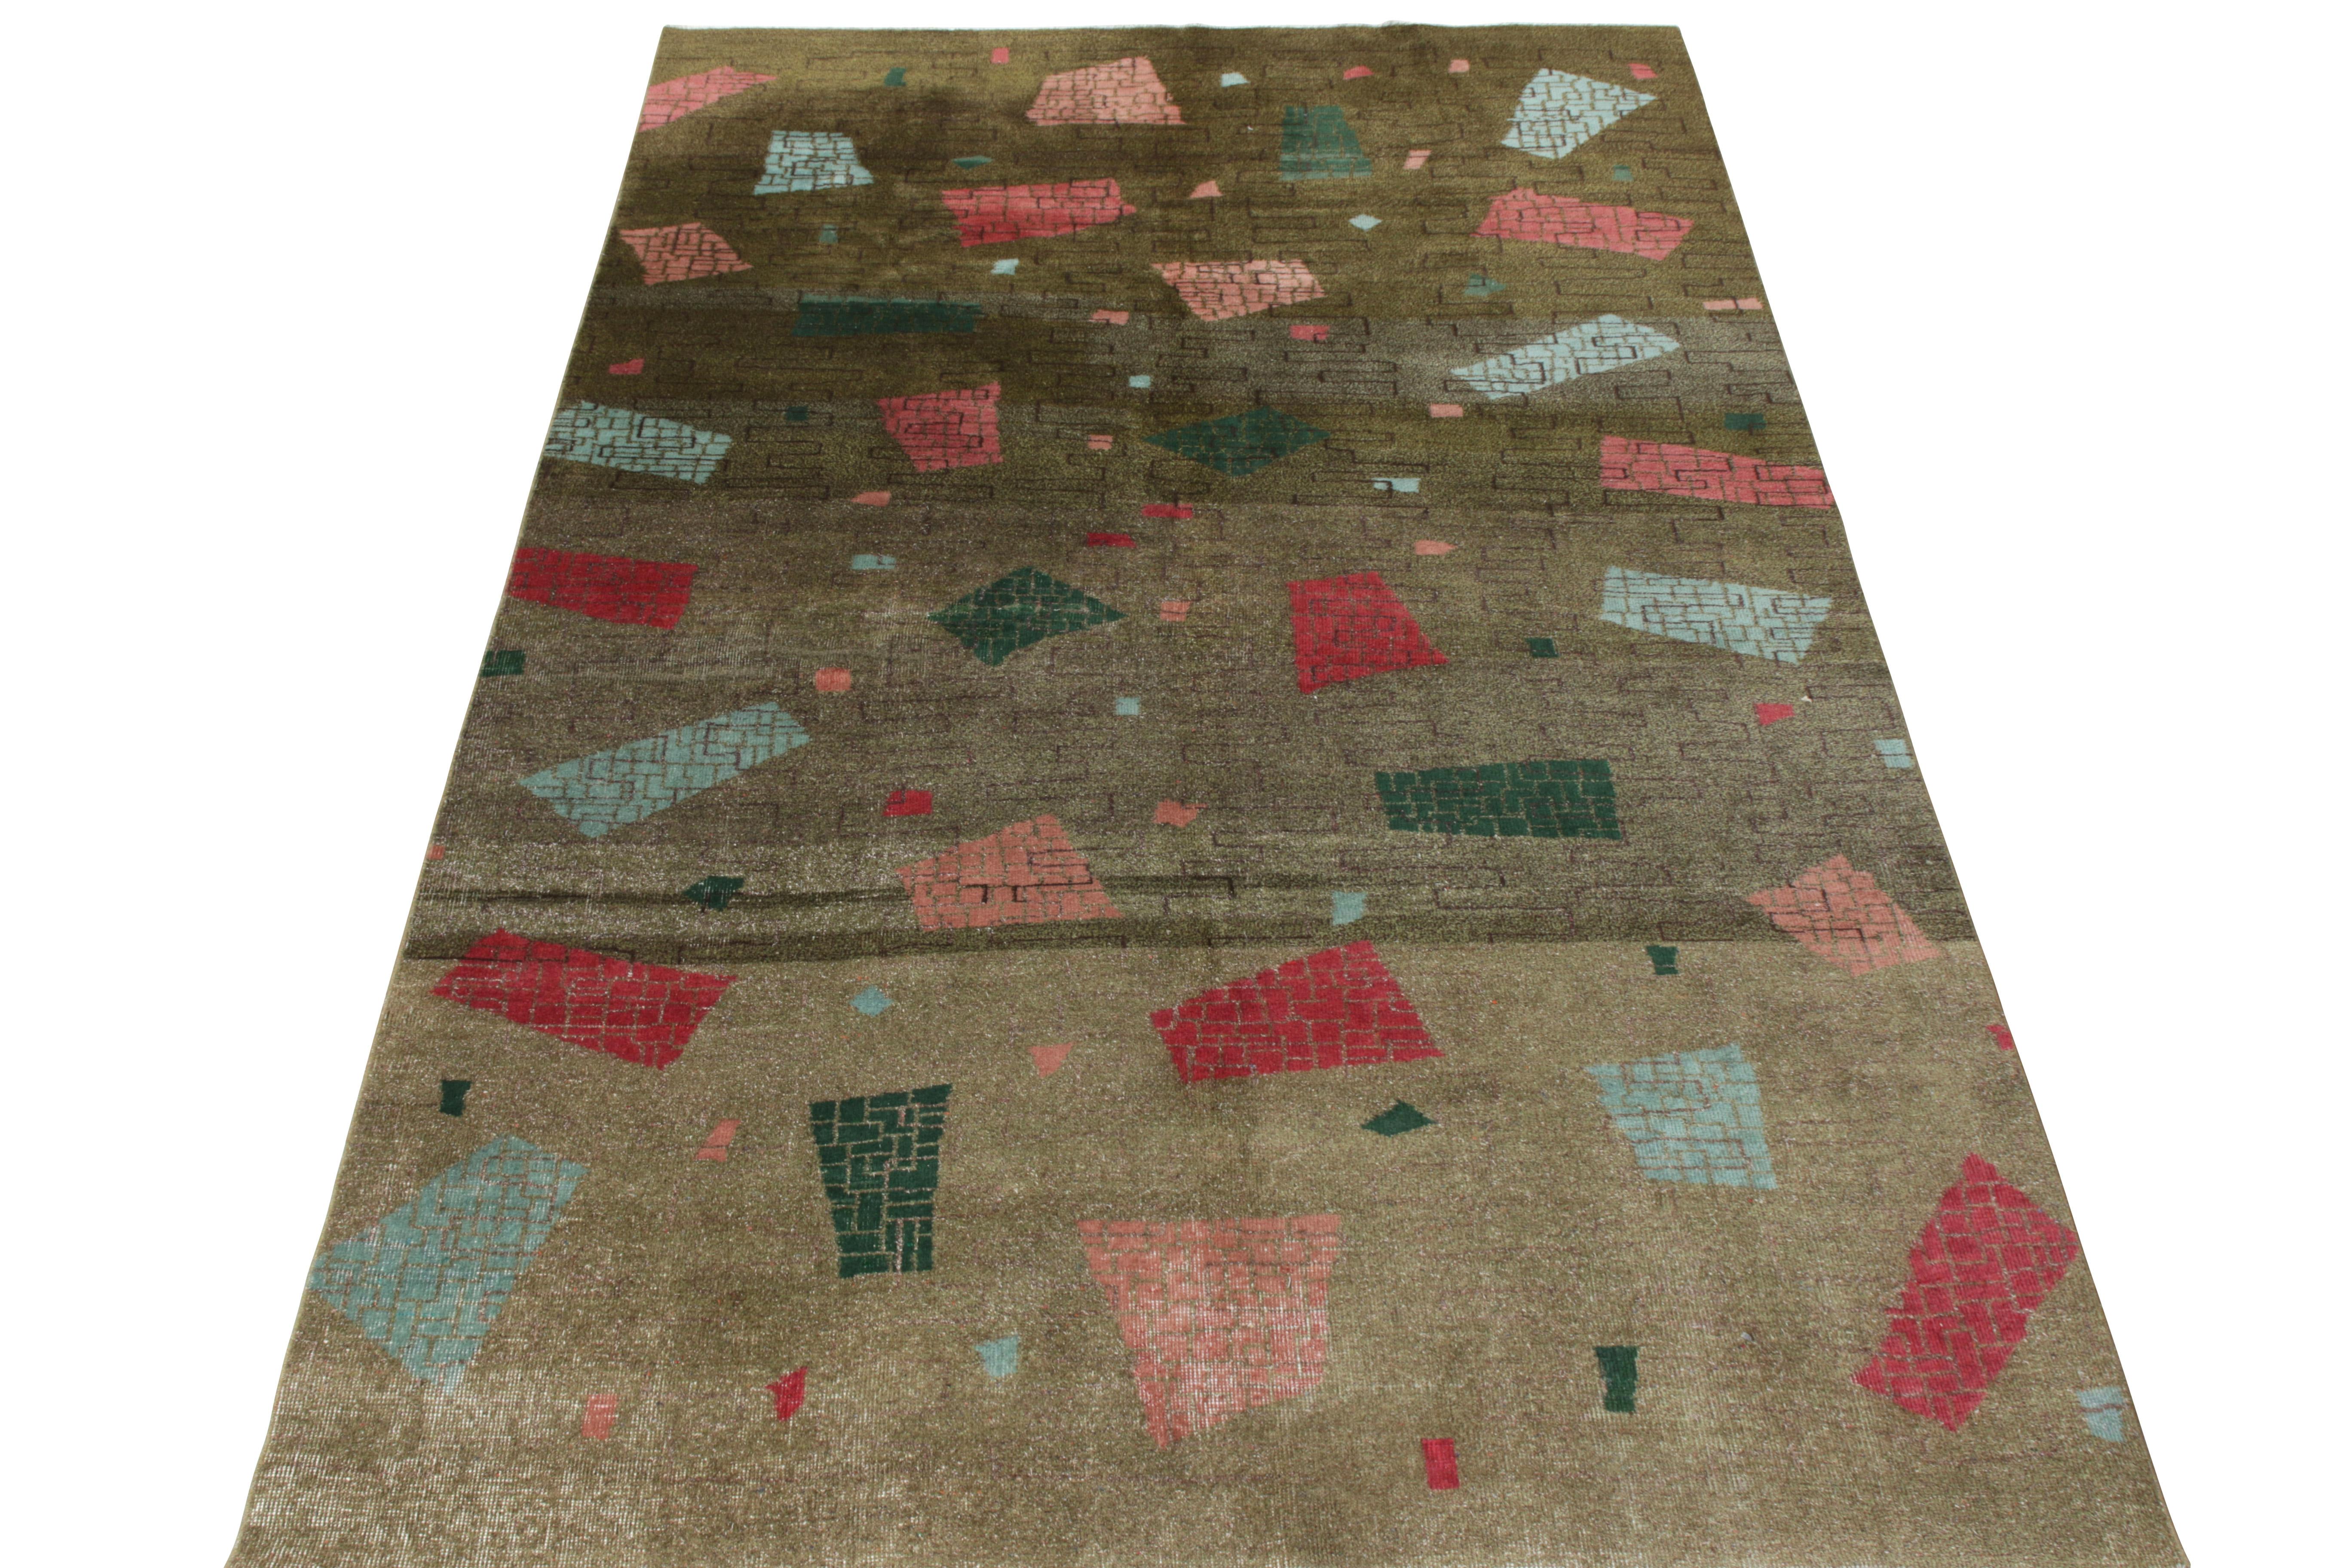 Hand-knotted in wool, this 6x10 vintage Turkish Deco rug piece joins Rug & Kilim’s Mid-Century Pasha collection. This repertoire features the iconic works of the legendary designer Zeki Muren that showcases his wholehearted love for the 1960s style